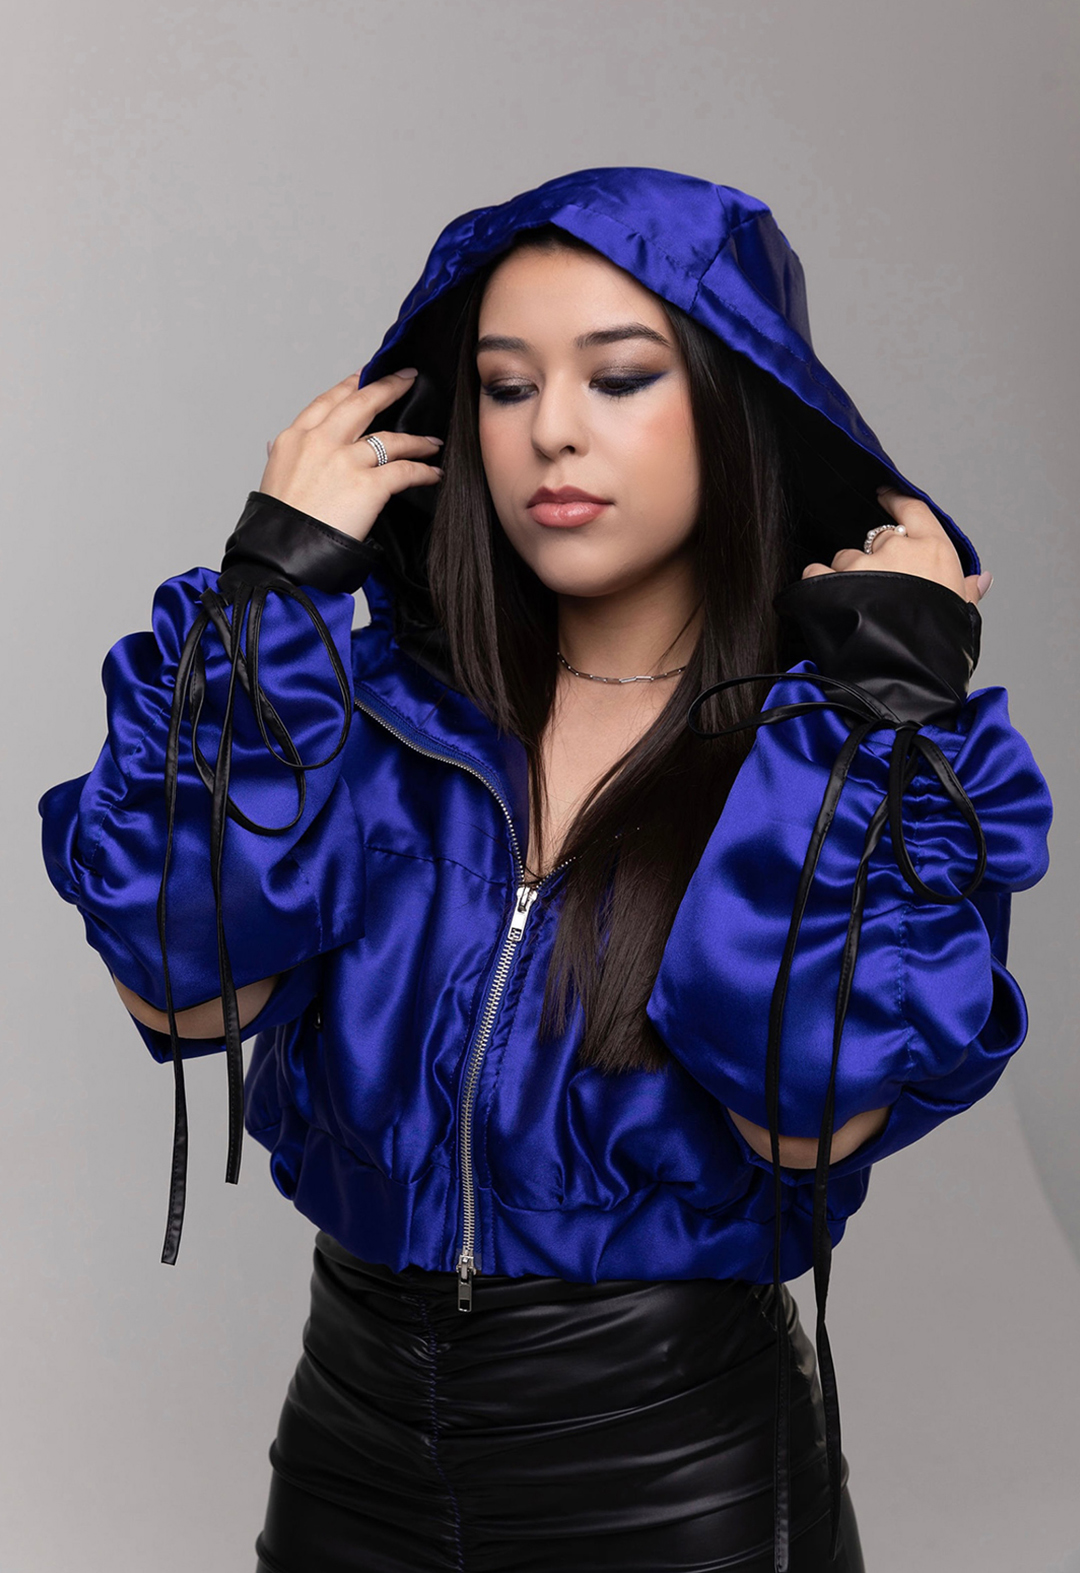 This is a close-up photo of a model wearing a royal blue jacket. She has the hood on and she has her hands on the hood. There are black drawstrings at the cuff of the jacket. The background is gray. 